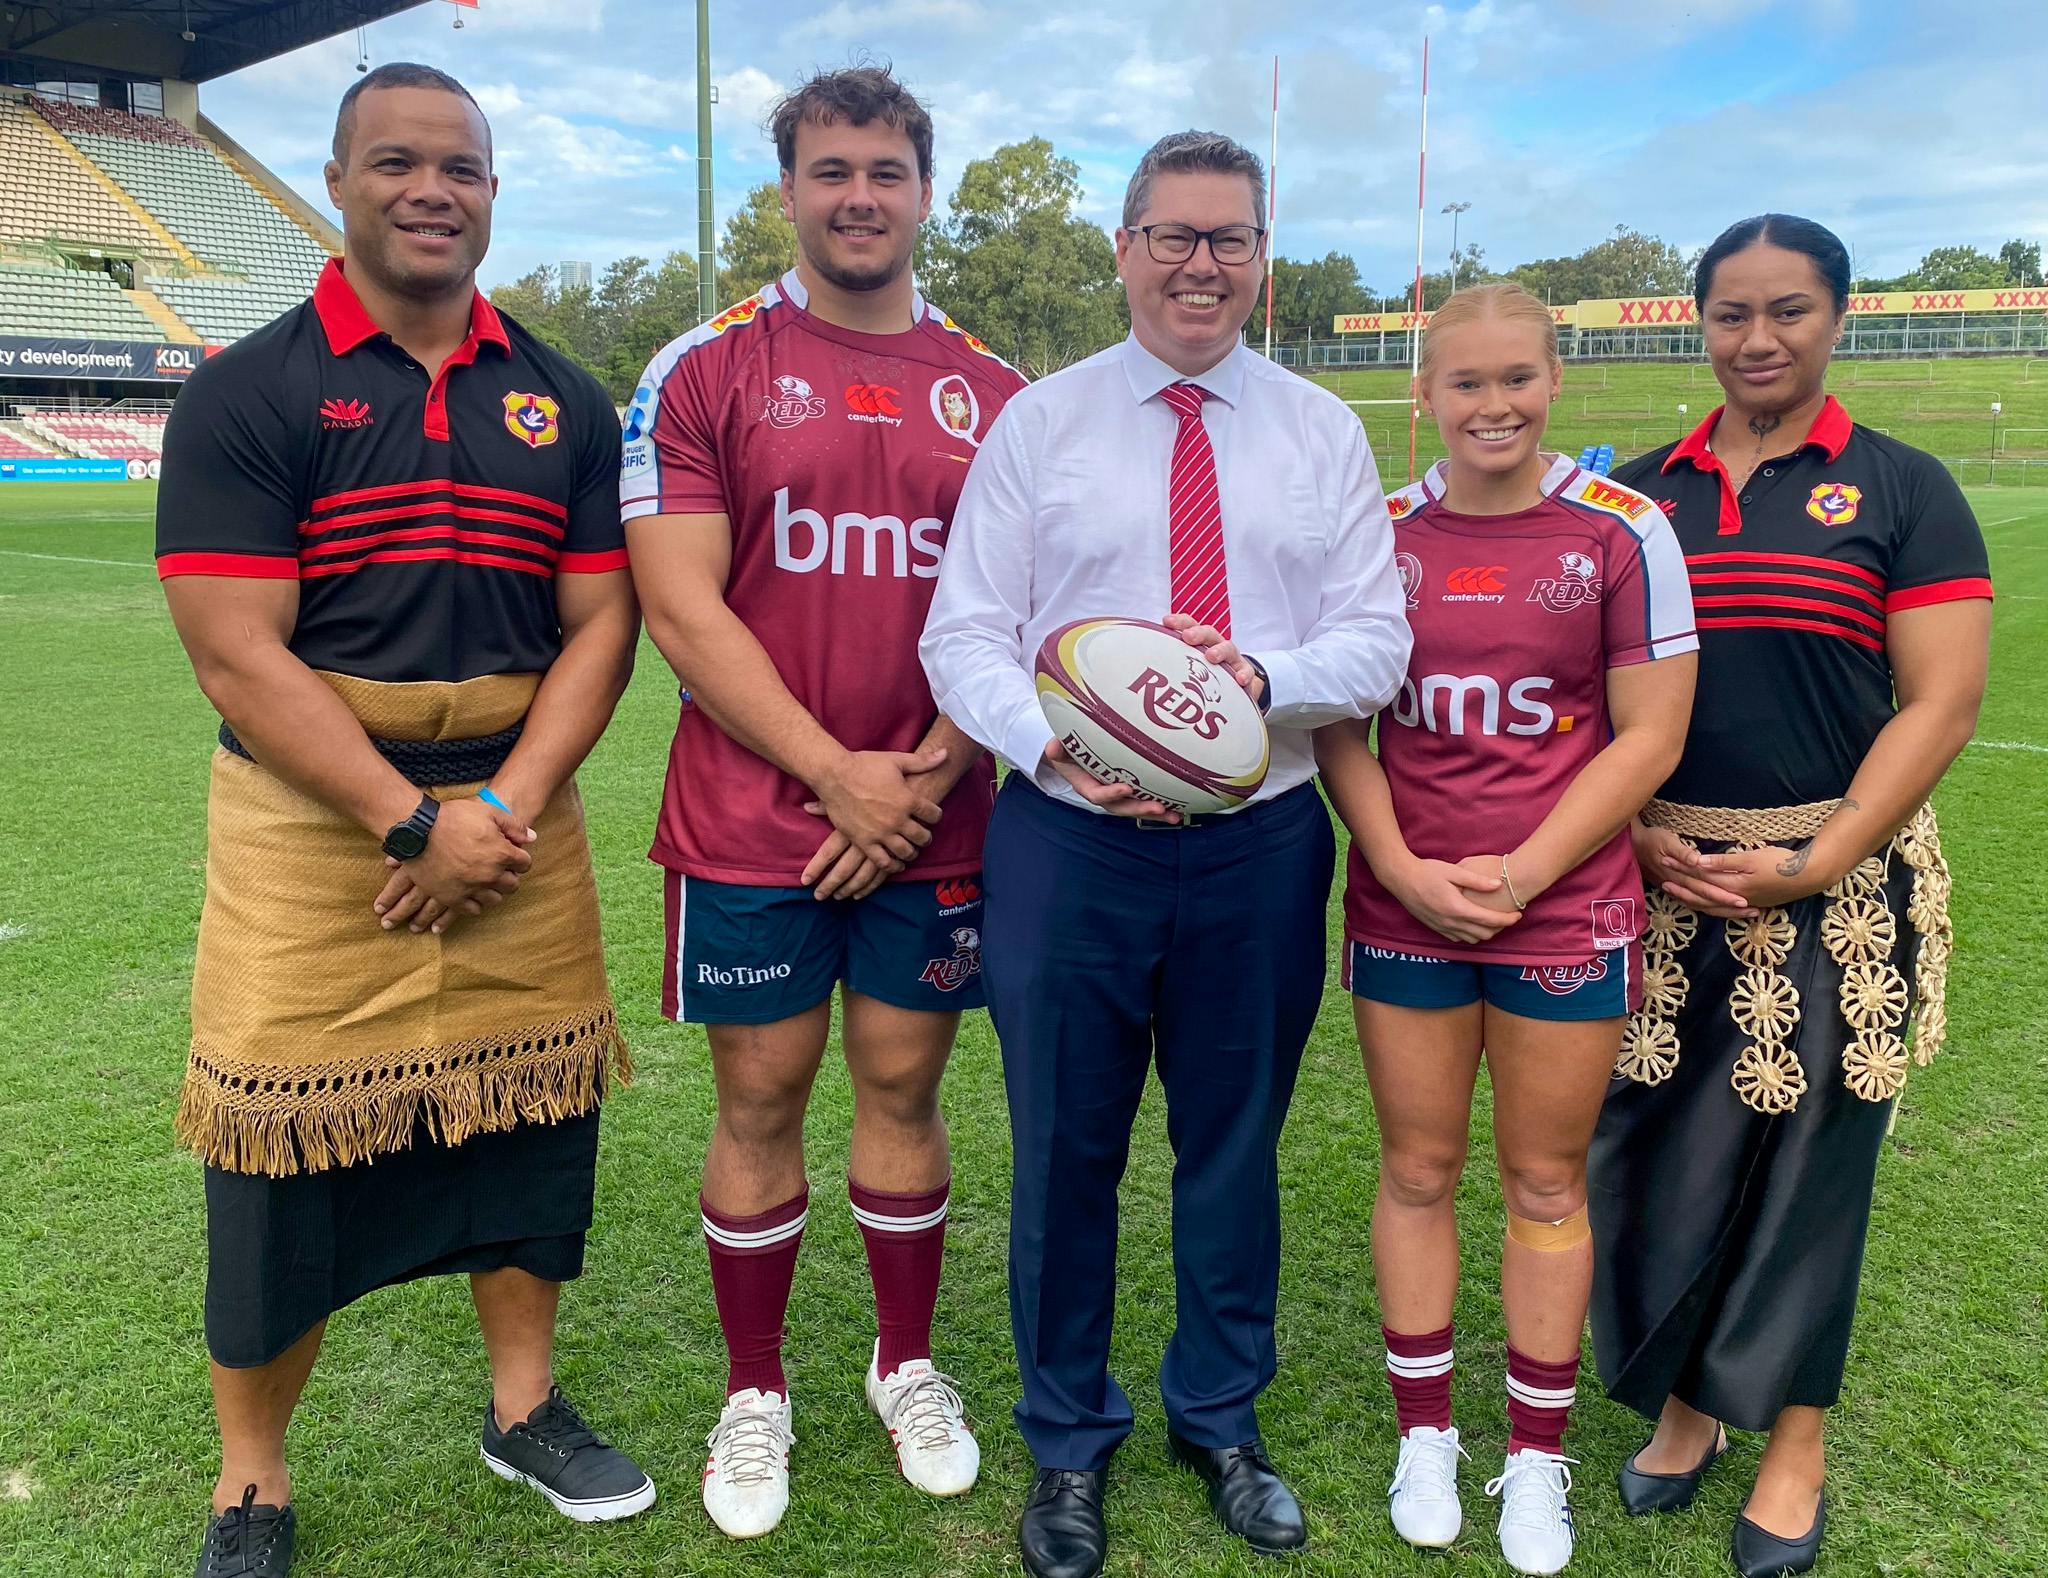 Minister for International Development and the Pacific, the Hon Pat Conroy MP, at Ballymore Stadium announcing the landmark rugby tour of Tonga for the Queensland Reds men's and women's teams with from (left) Tongan women's coach Eddie Aholehei, Reds prop Massimo De Lutiis, Reds halfback Nat Wright and Tongan women's prop Ayla Cook.